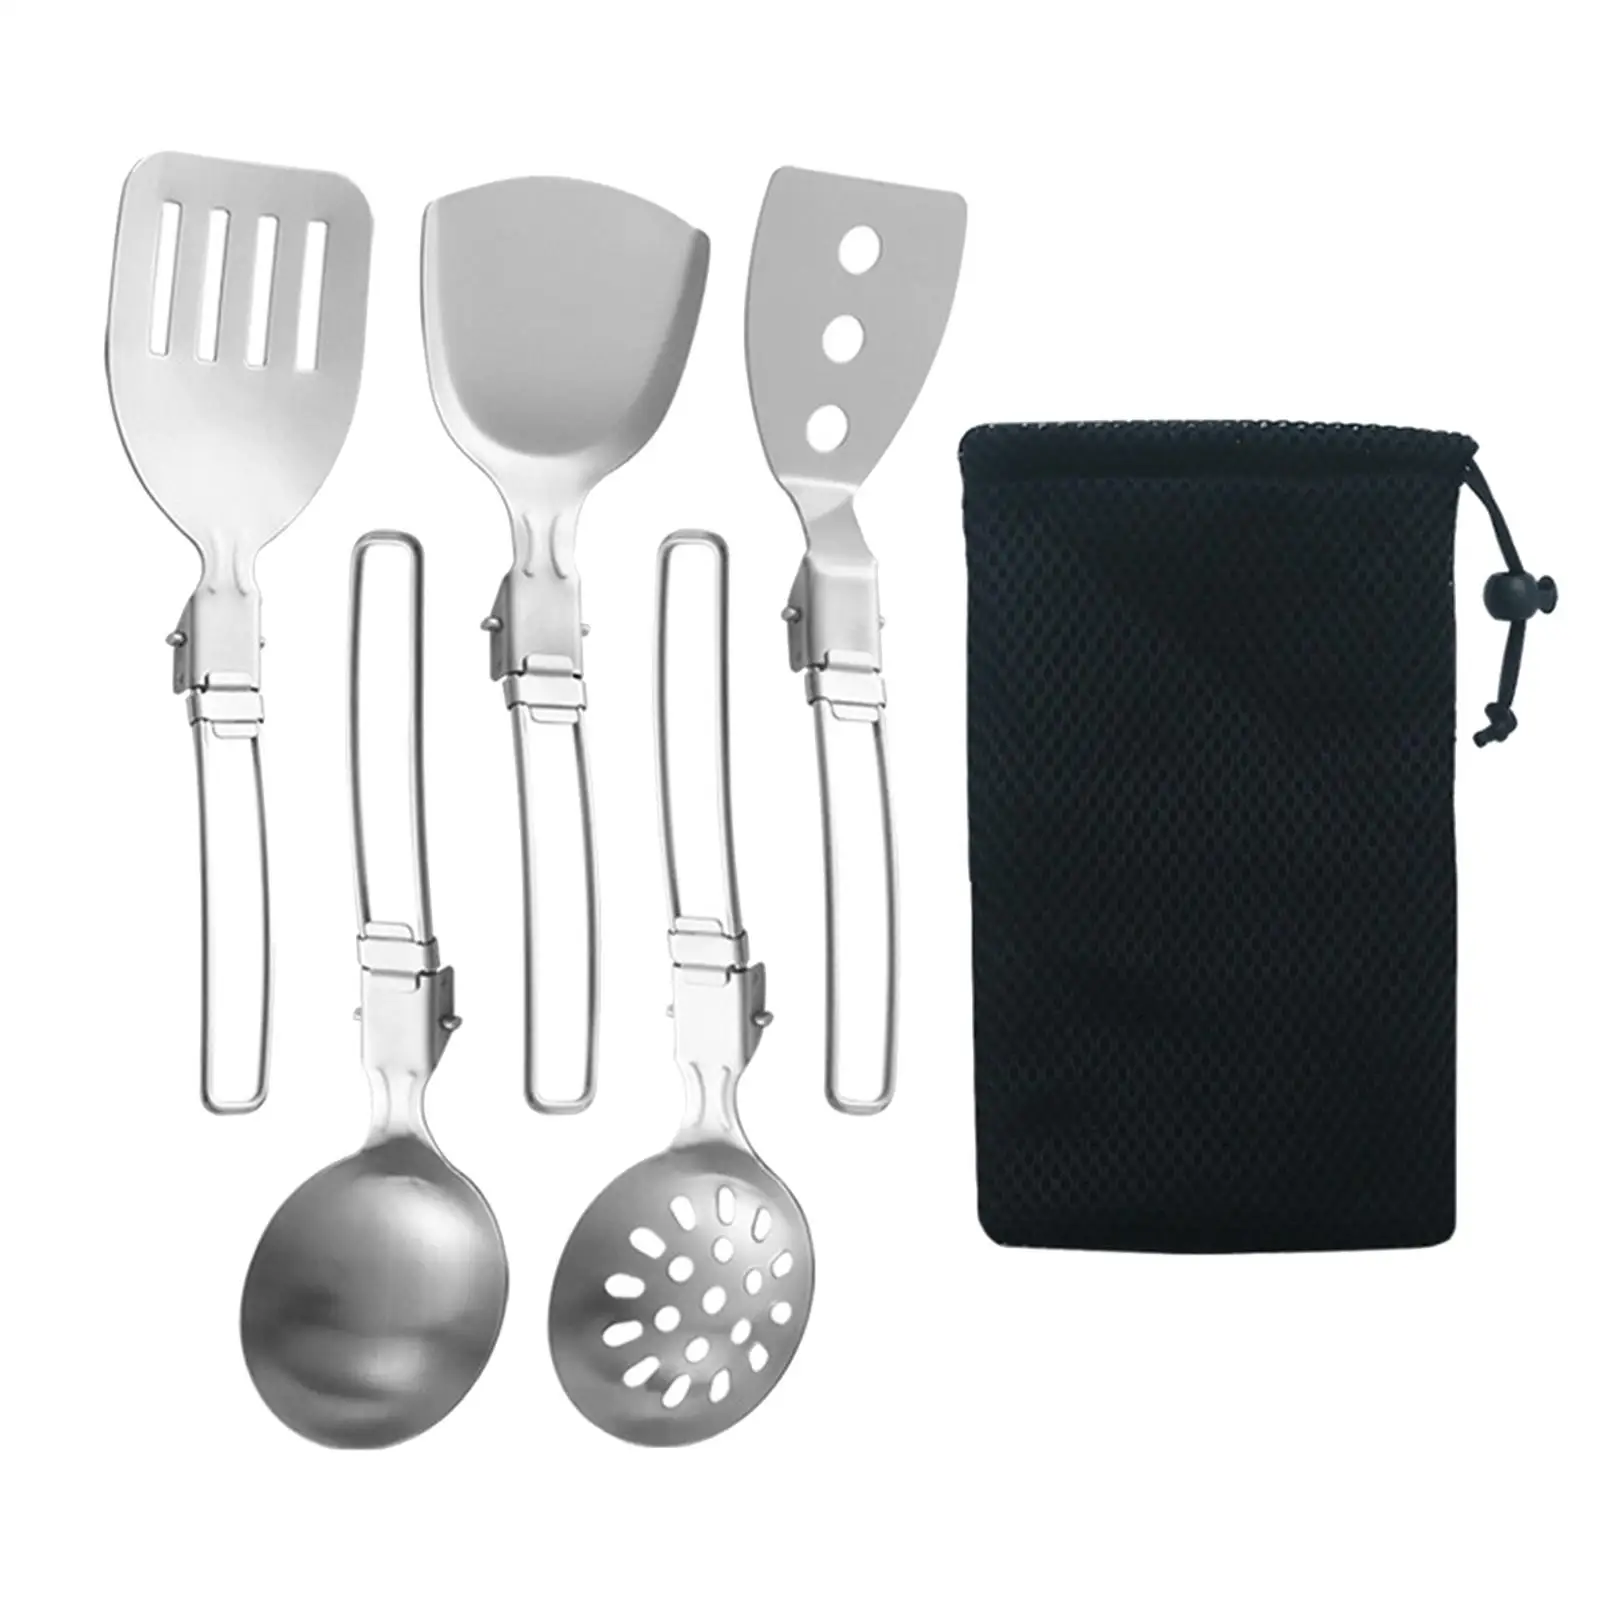 6x Camp Cooking Utensil Set Compact Metal Cookware Kit for Picnic BBQ Travel